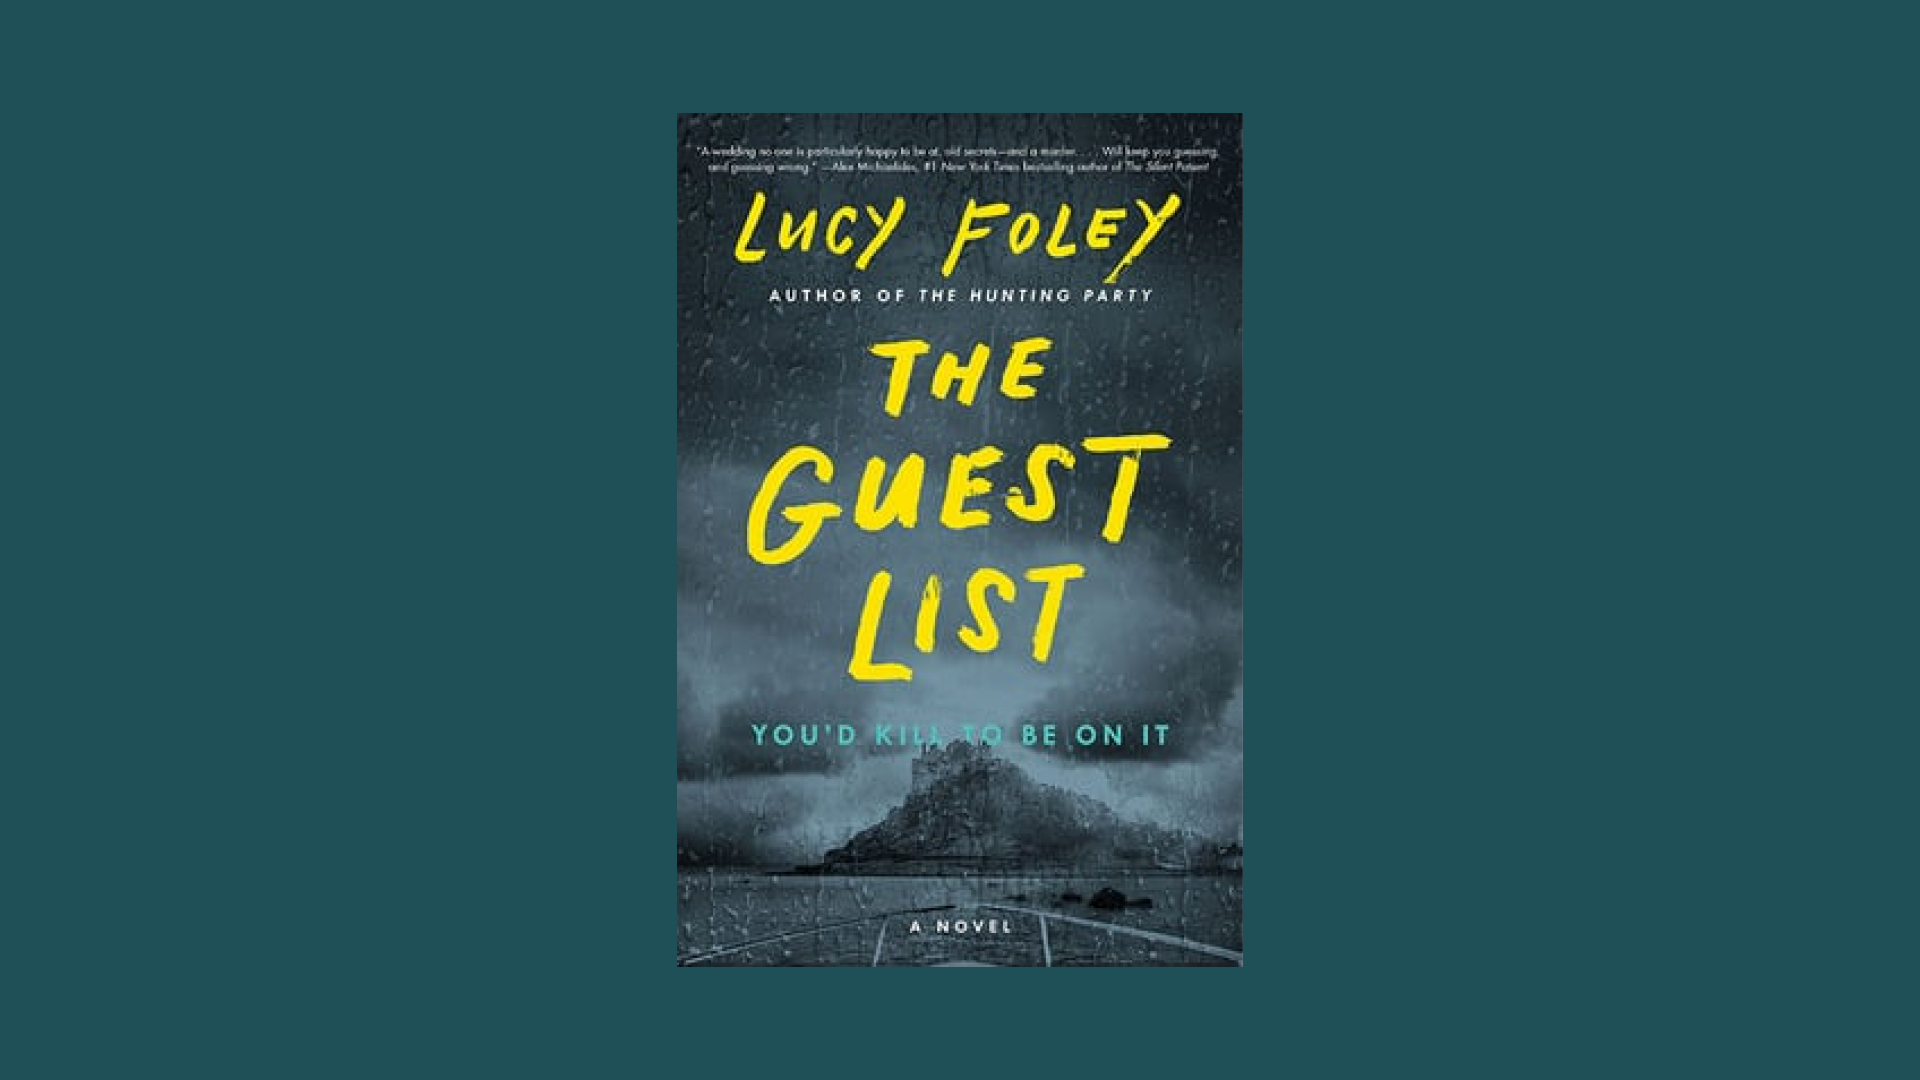 “The Guest List” by Lucy Foley